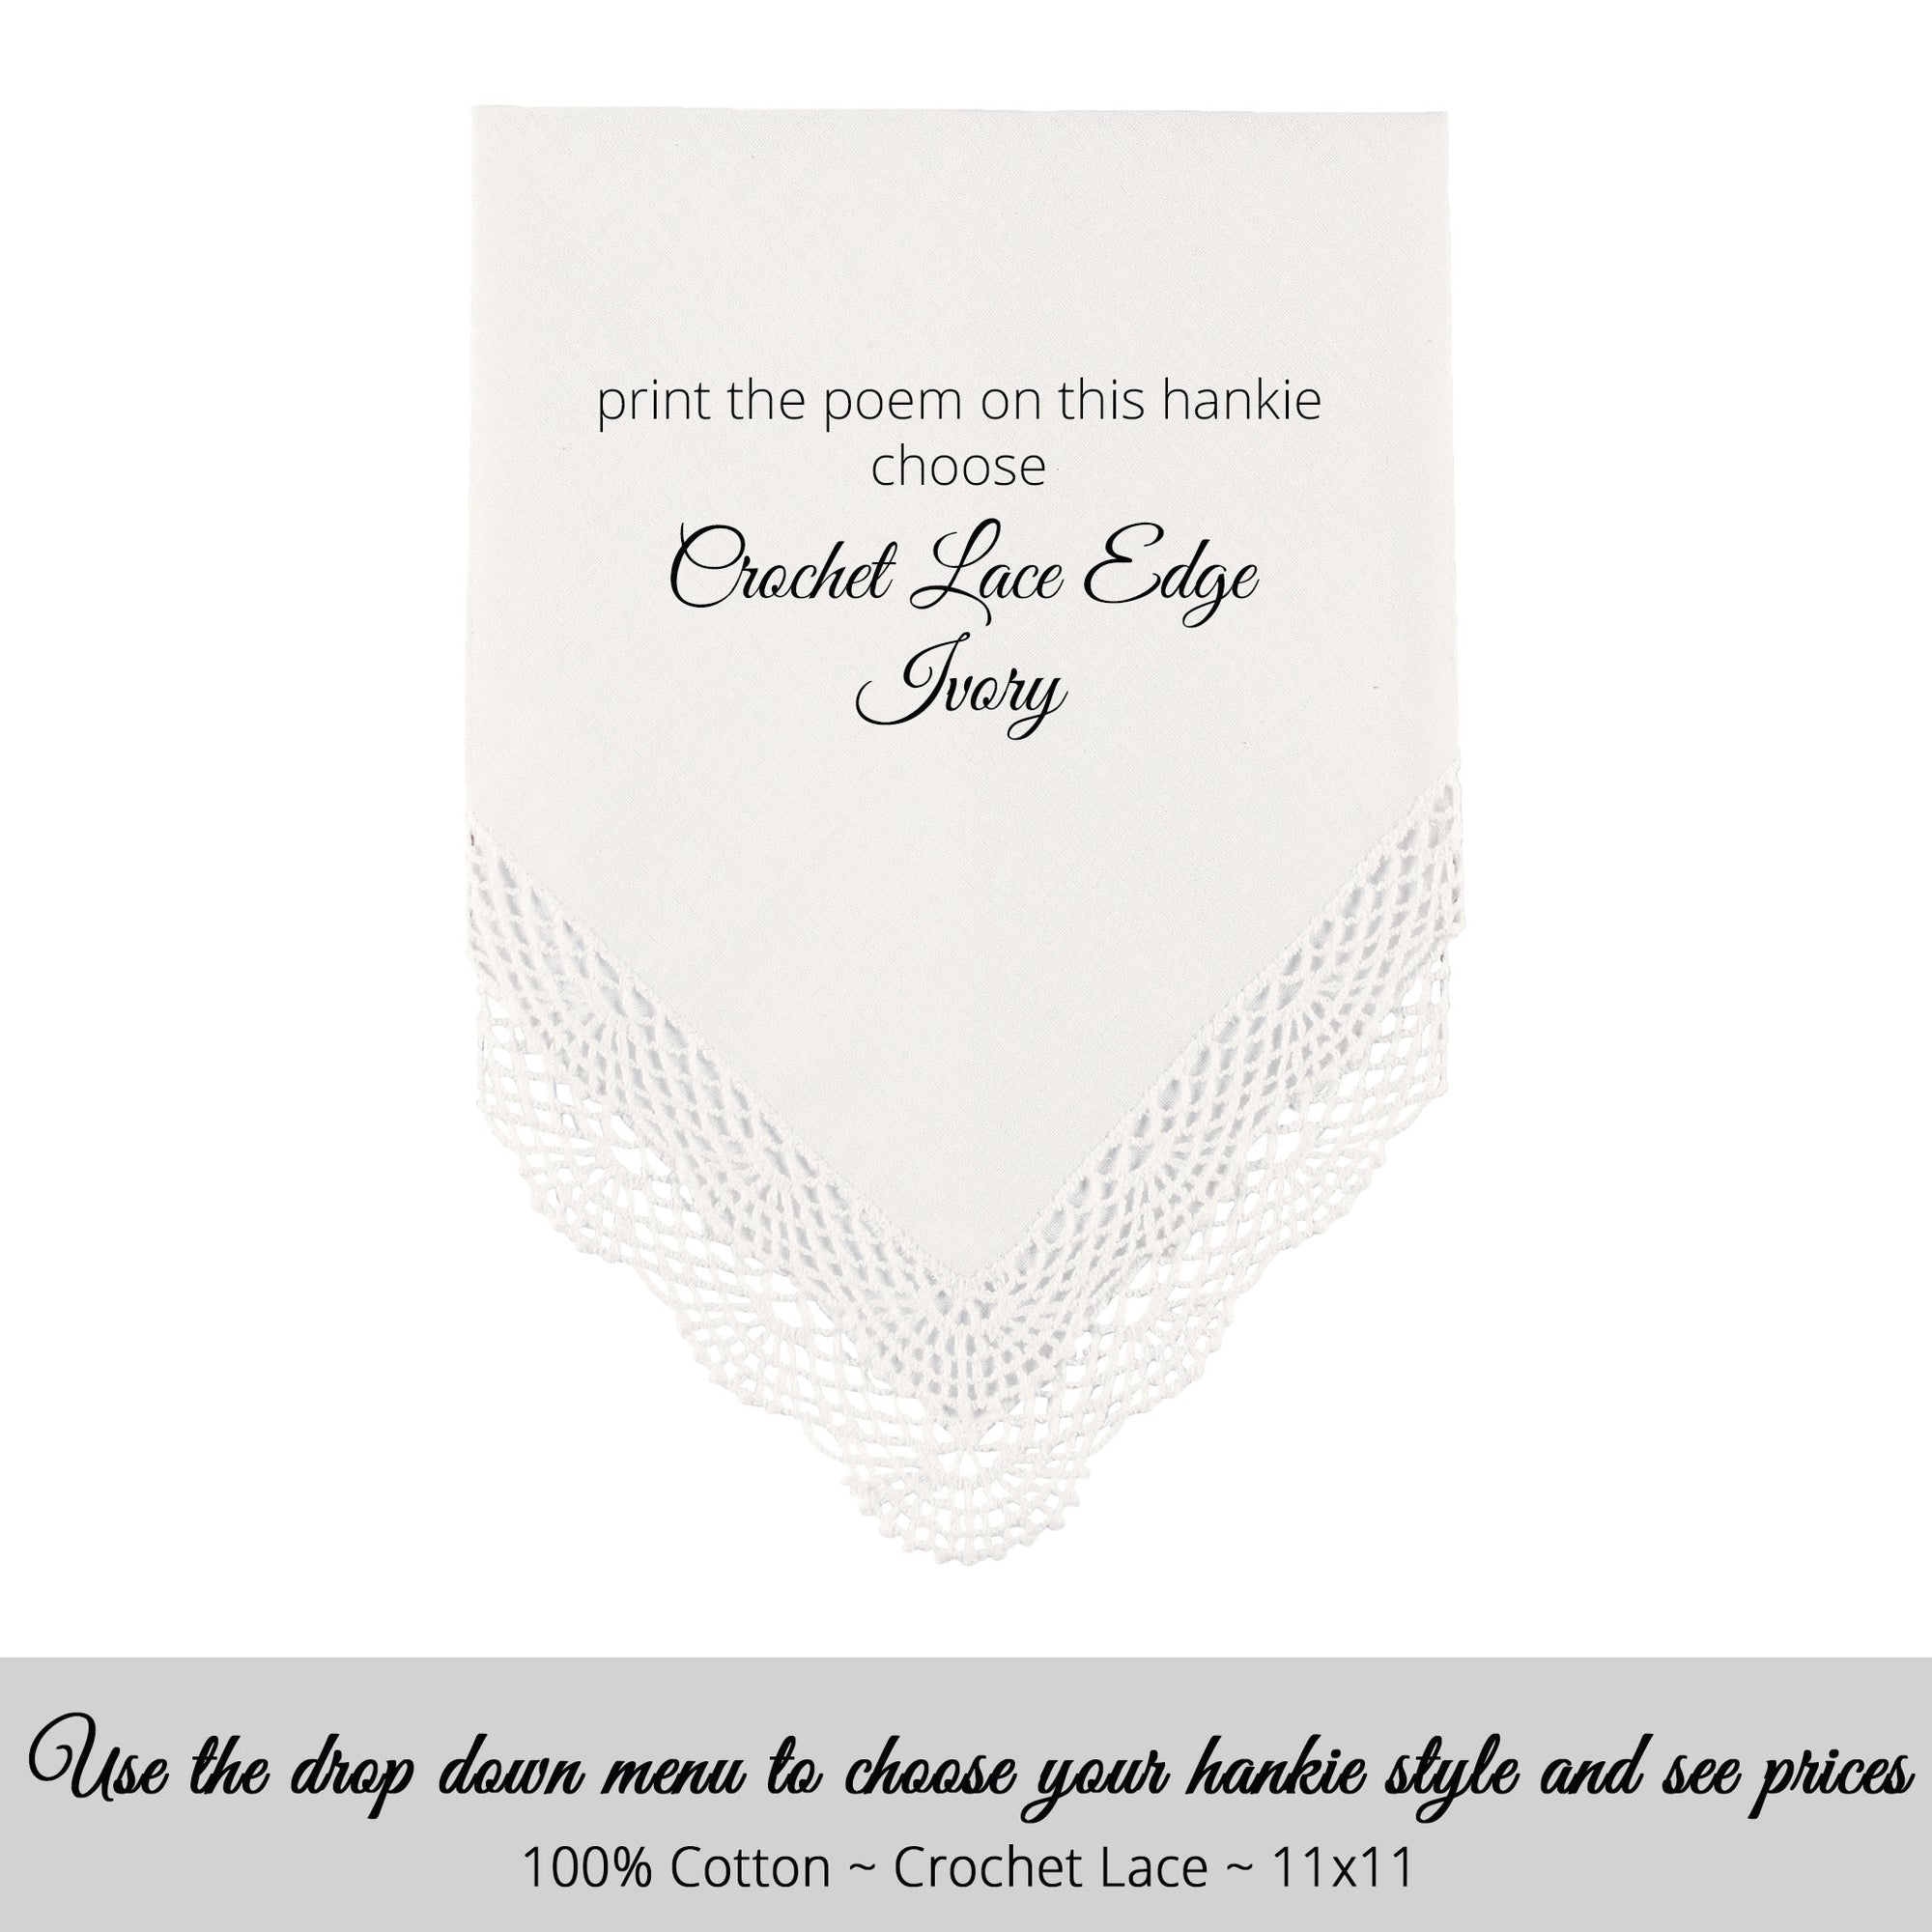 Wedding handkerchief ivory with crochet lace edge  poem printed hankie for the flower girl gift